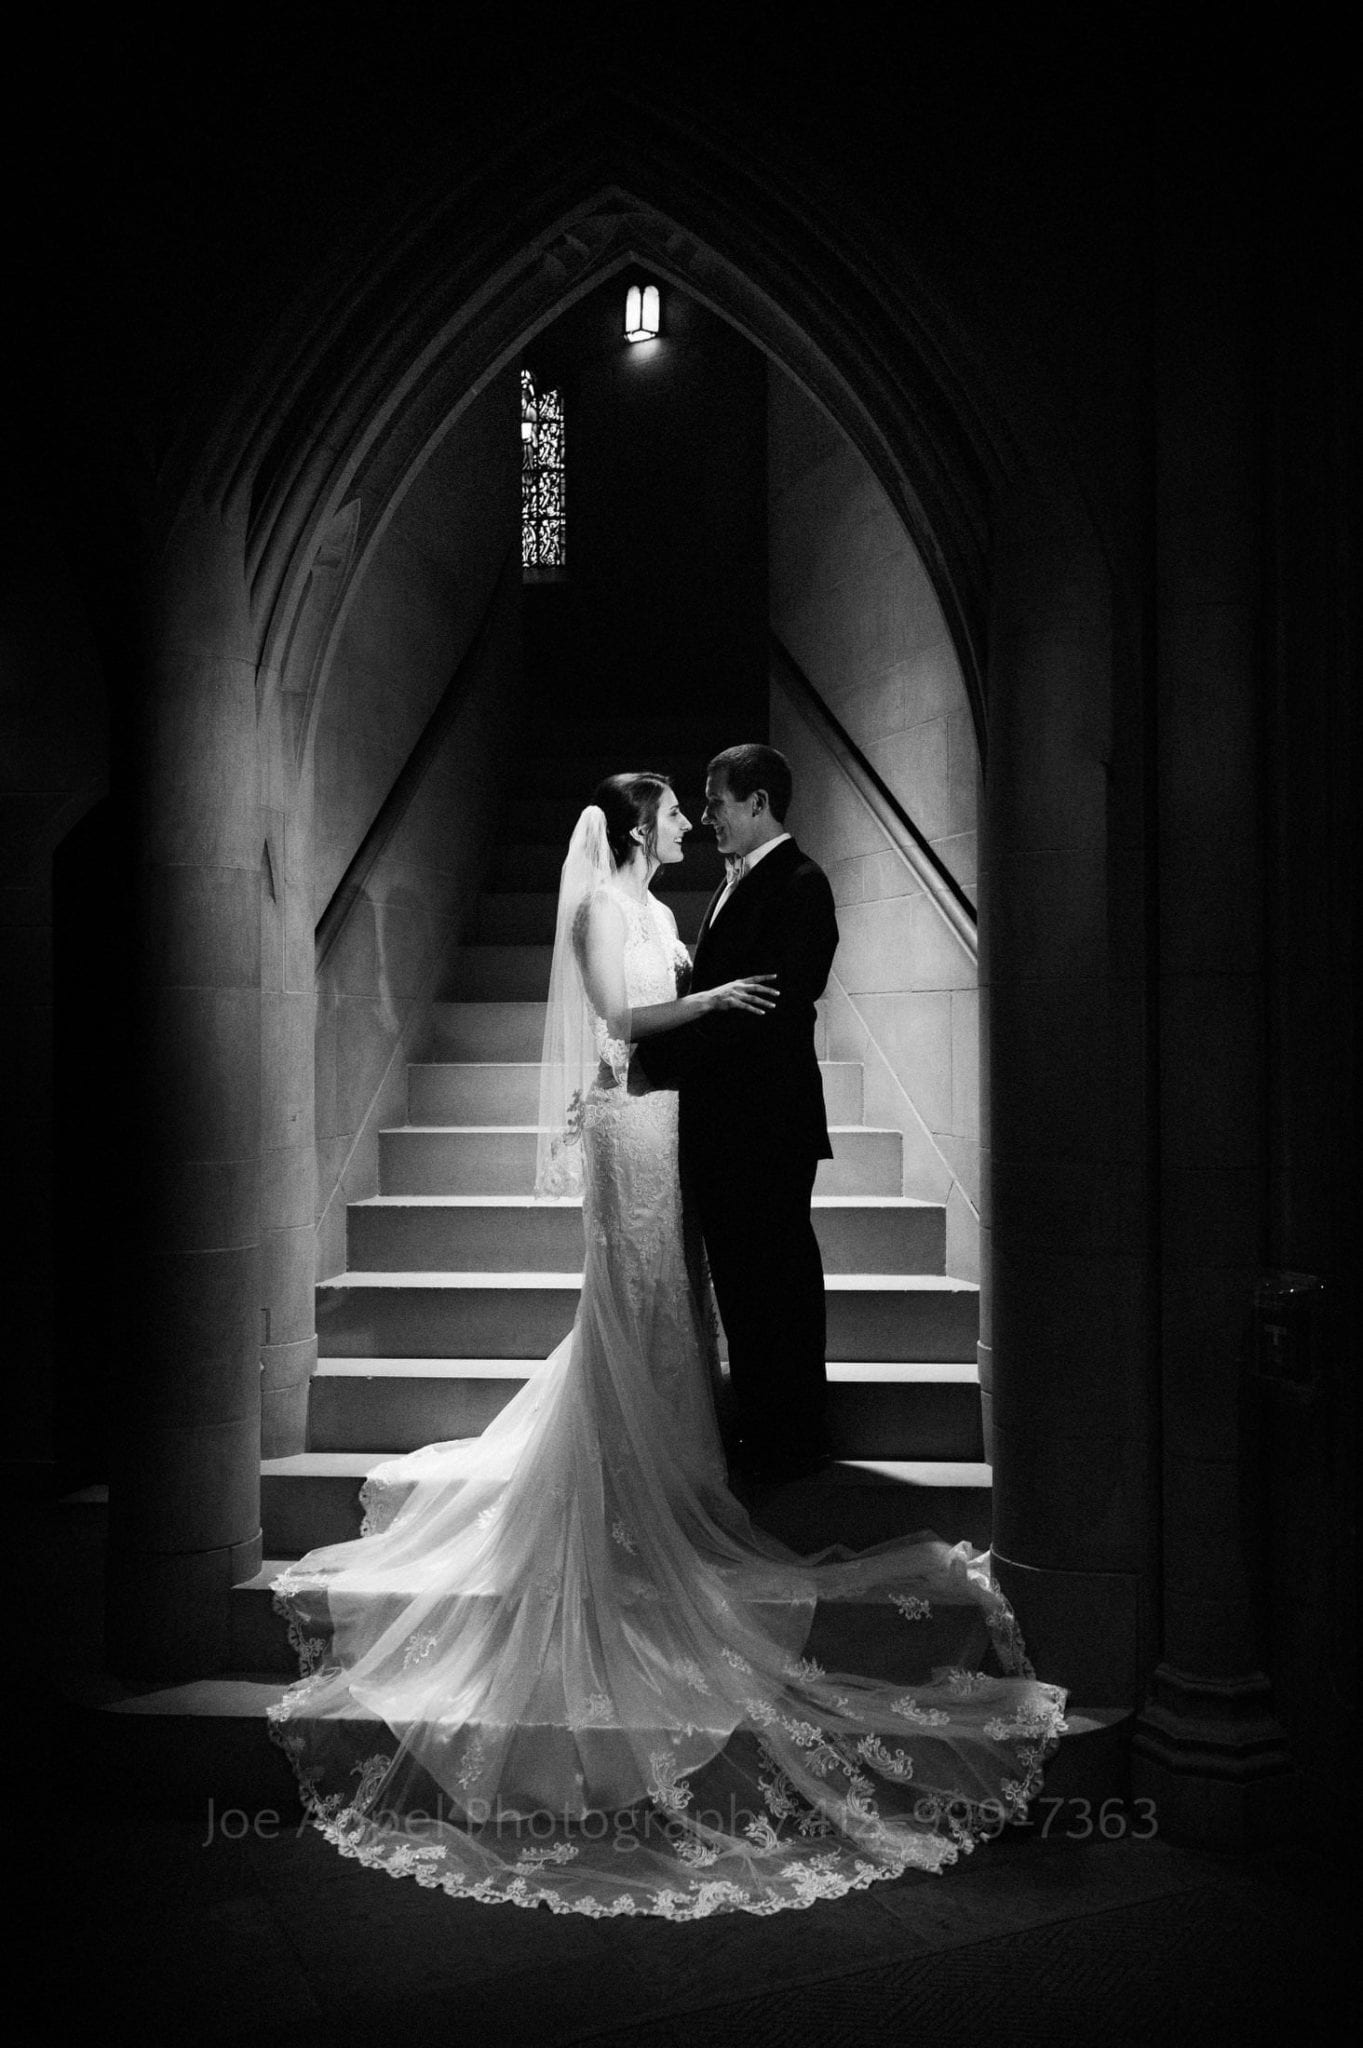 a bride and groom face each other in the archway leading to the choir loft at heinz memorial chapel